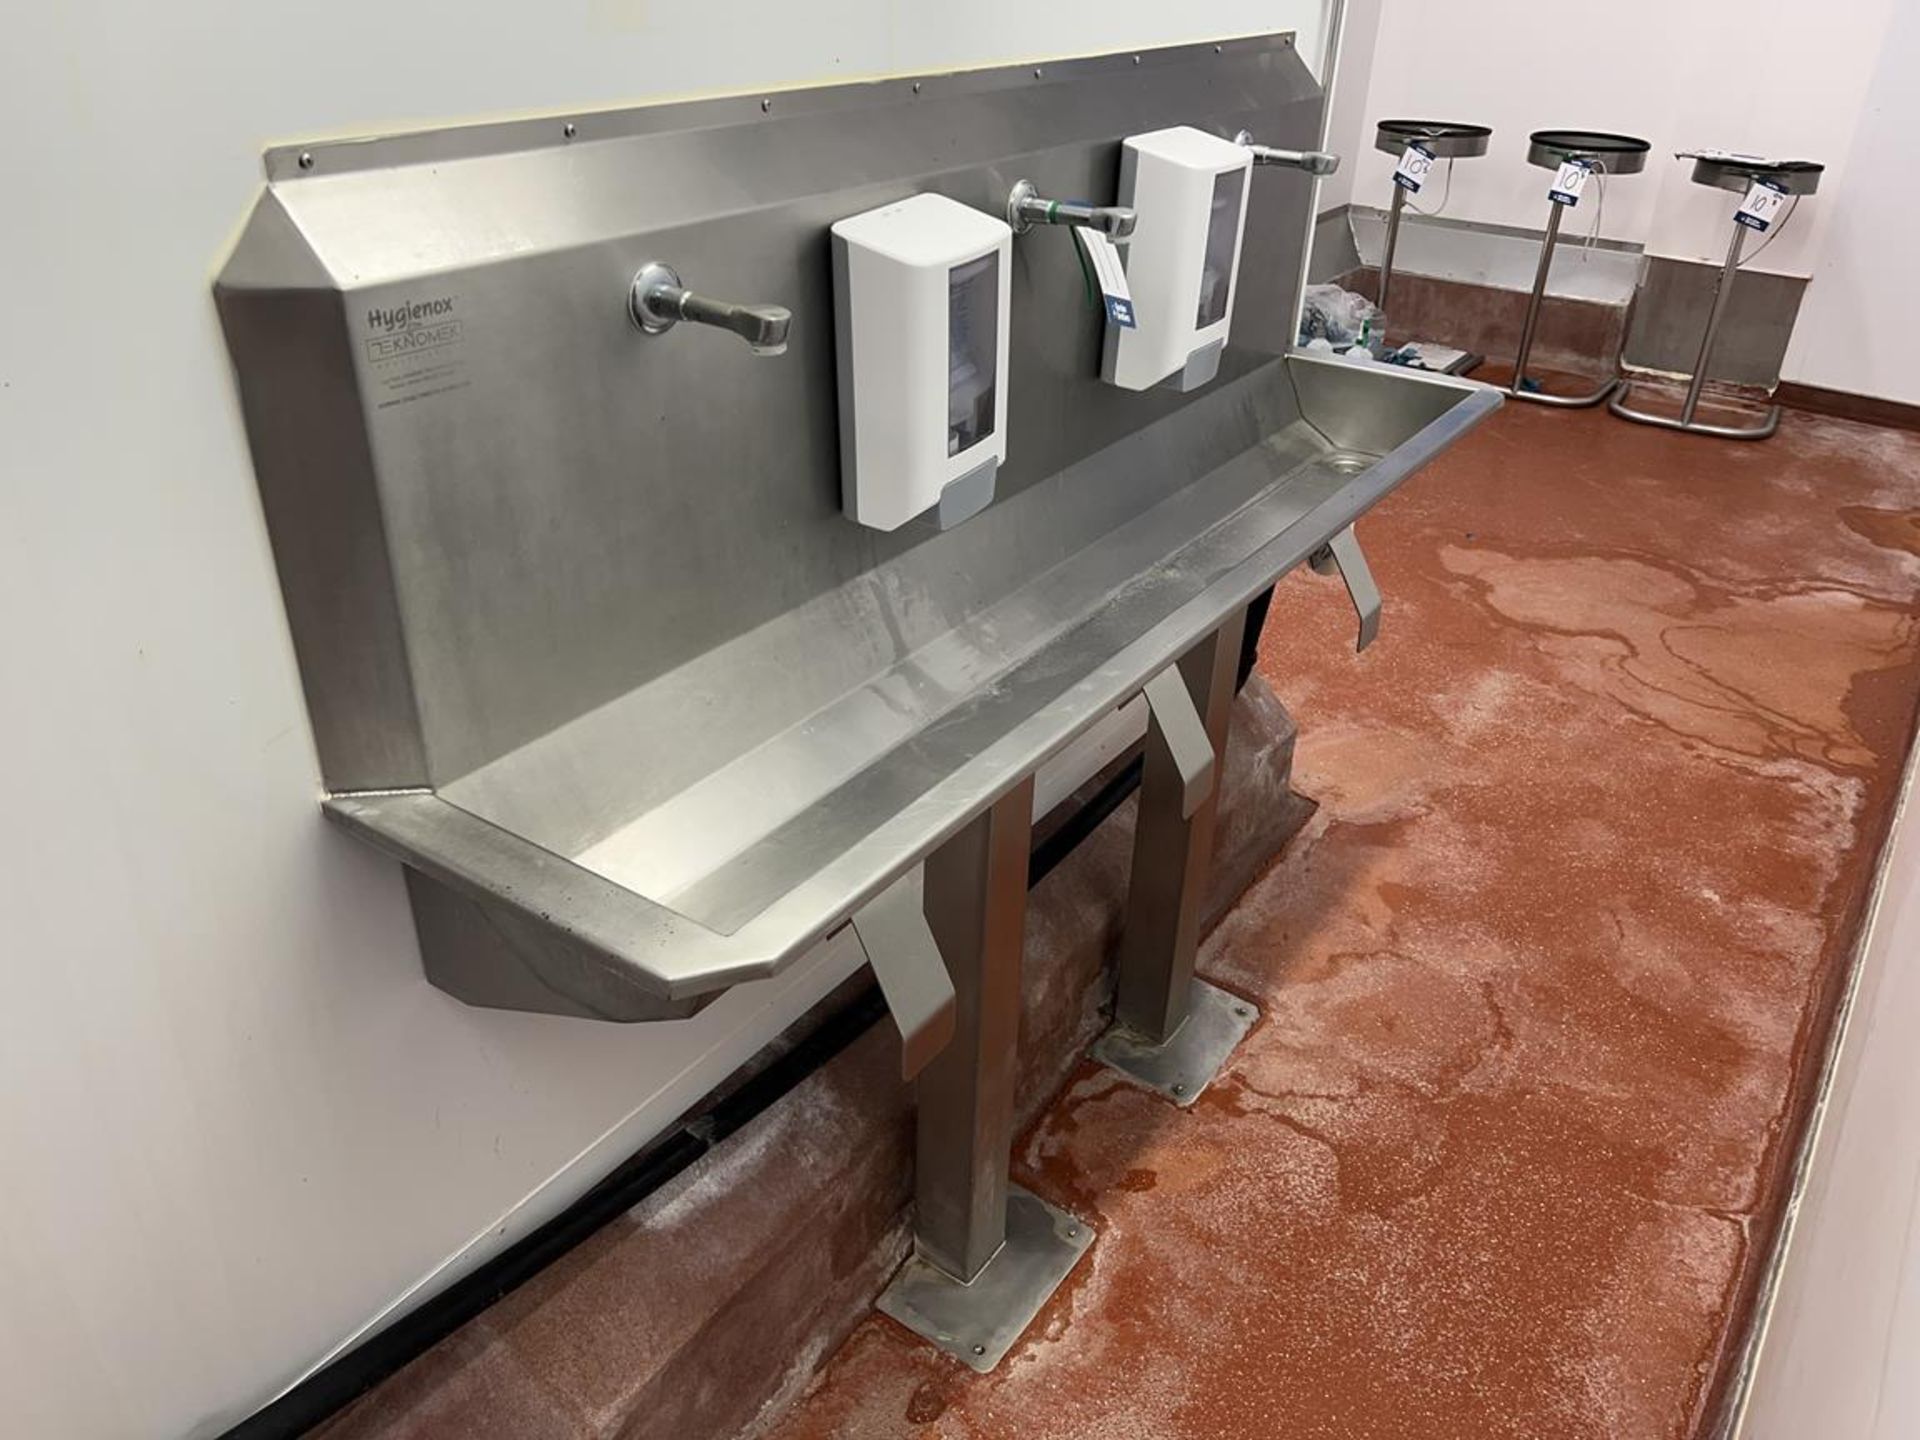 Hygienox Teknomek, three position, knee operated, stainless steel sink unit, 1.6m x 380mm x 1.3m (H) - Image 3 of 10